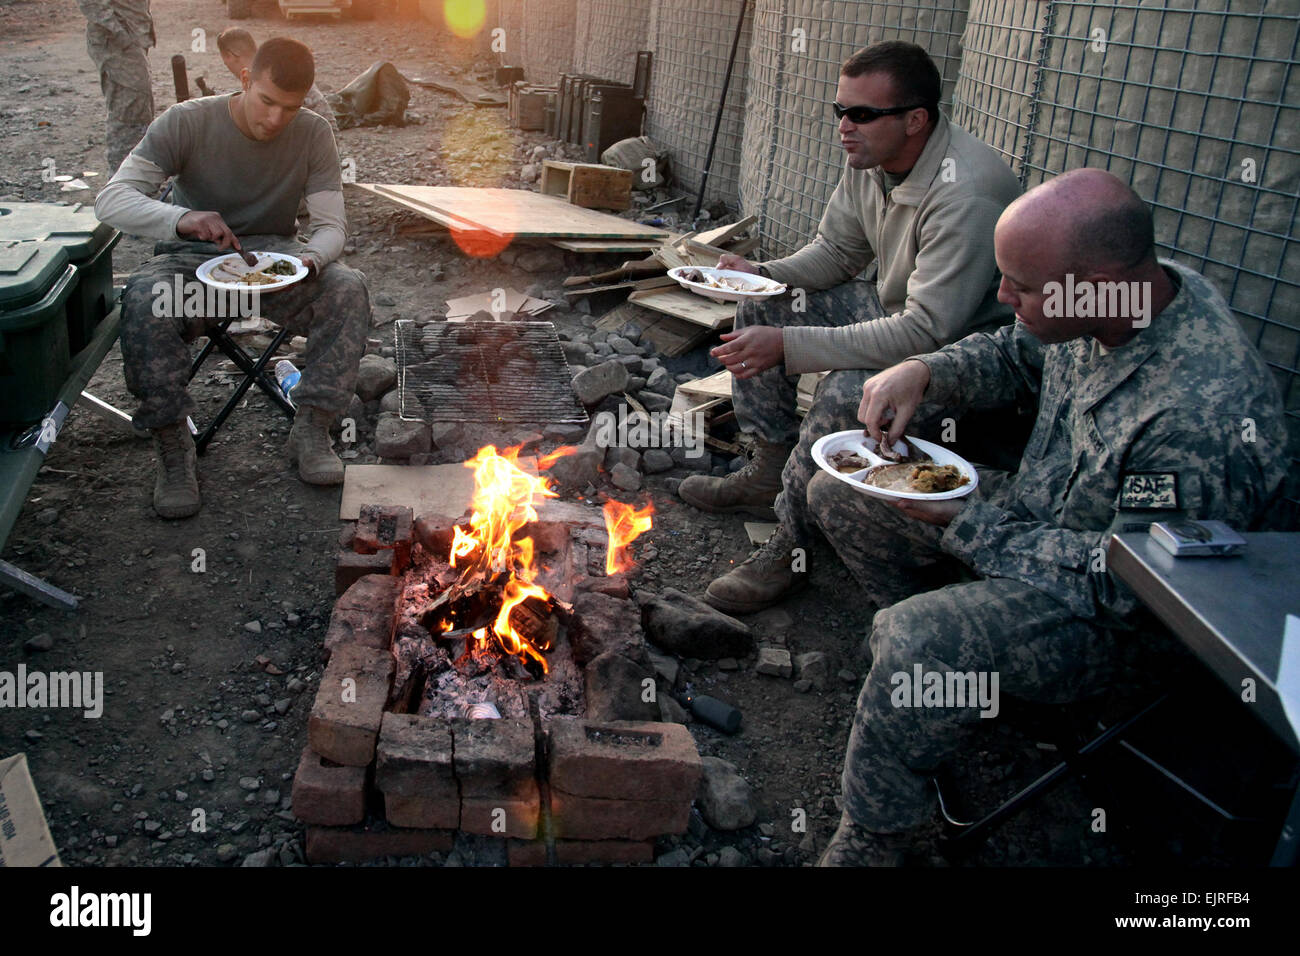 U.S. Army Soldiers eat their Thanksgiving meal on Combat Outpost Cherkatah, Khowst province, Afghanistan, Nov. 26, 2009. The Soldiers are deployed with Company D, 3rd Battalion, 509th Infantry Regiment. Staff Sgt. Andrew Smith Stock Photo